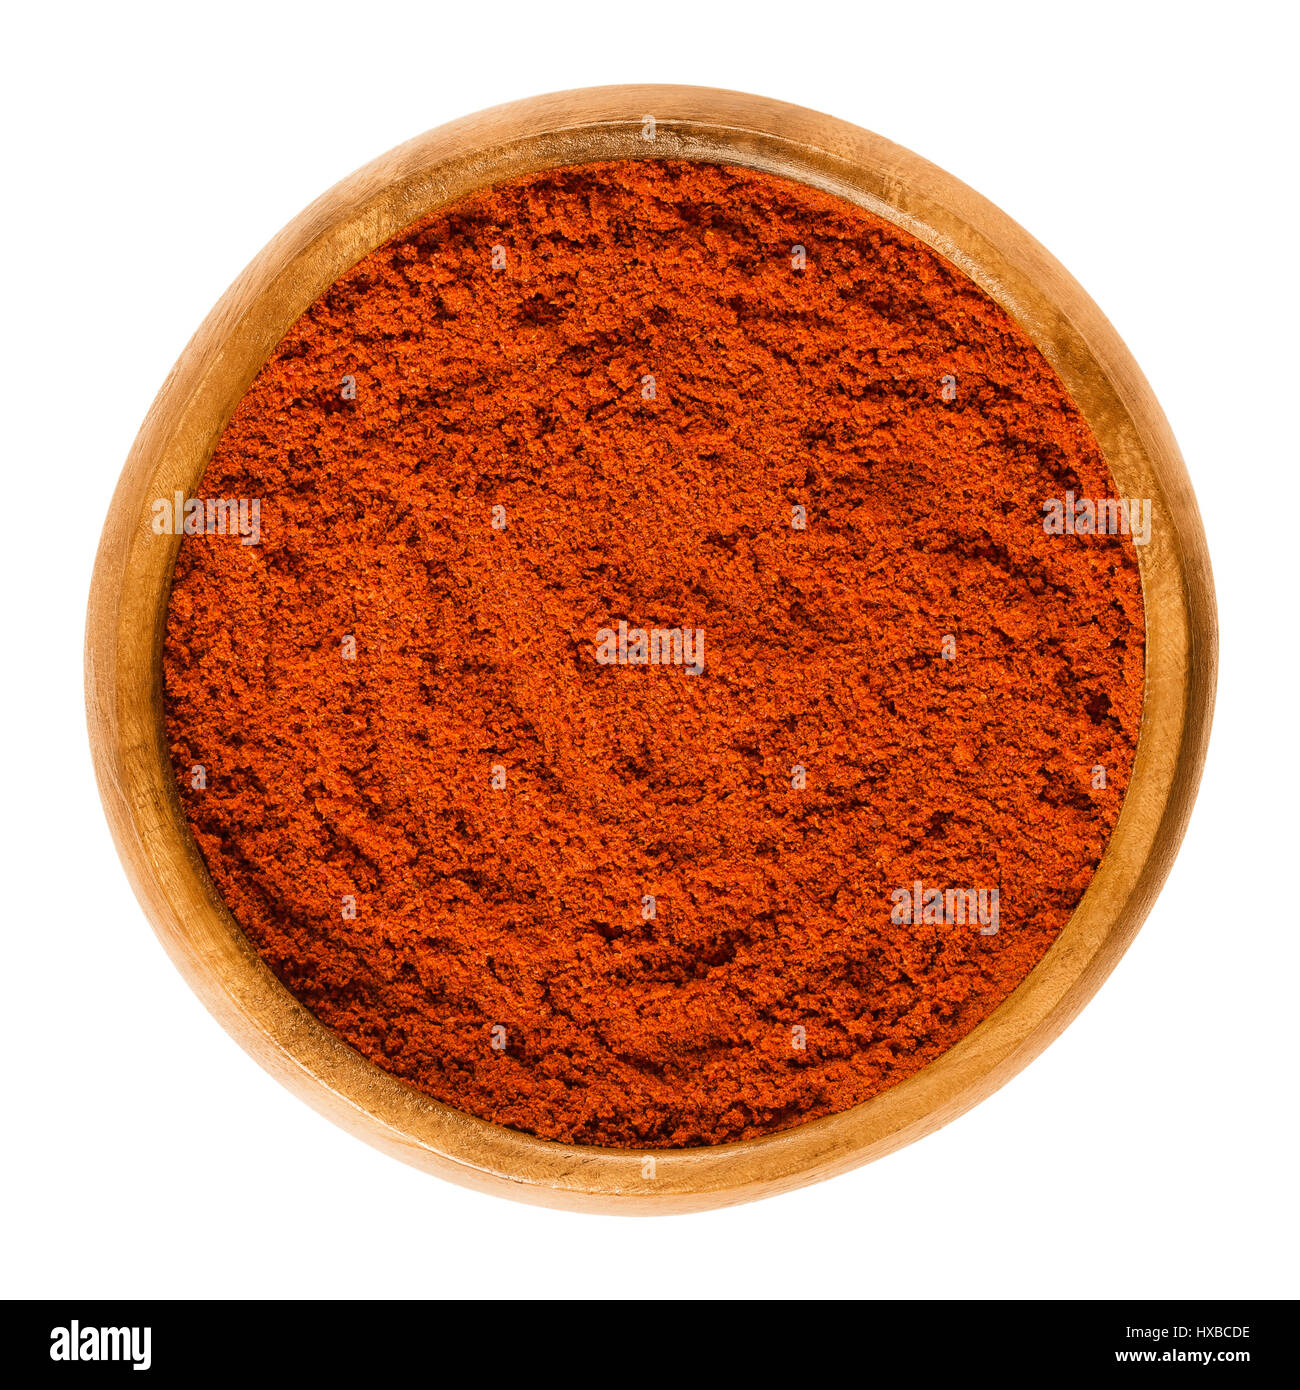 Sweet pepper red paprika powder in wooden bowl. Ground spice made from air-dried and smoked bell peppers, Capsicum annuum. Hungarian cuisine. Stock Photo